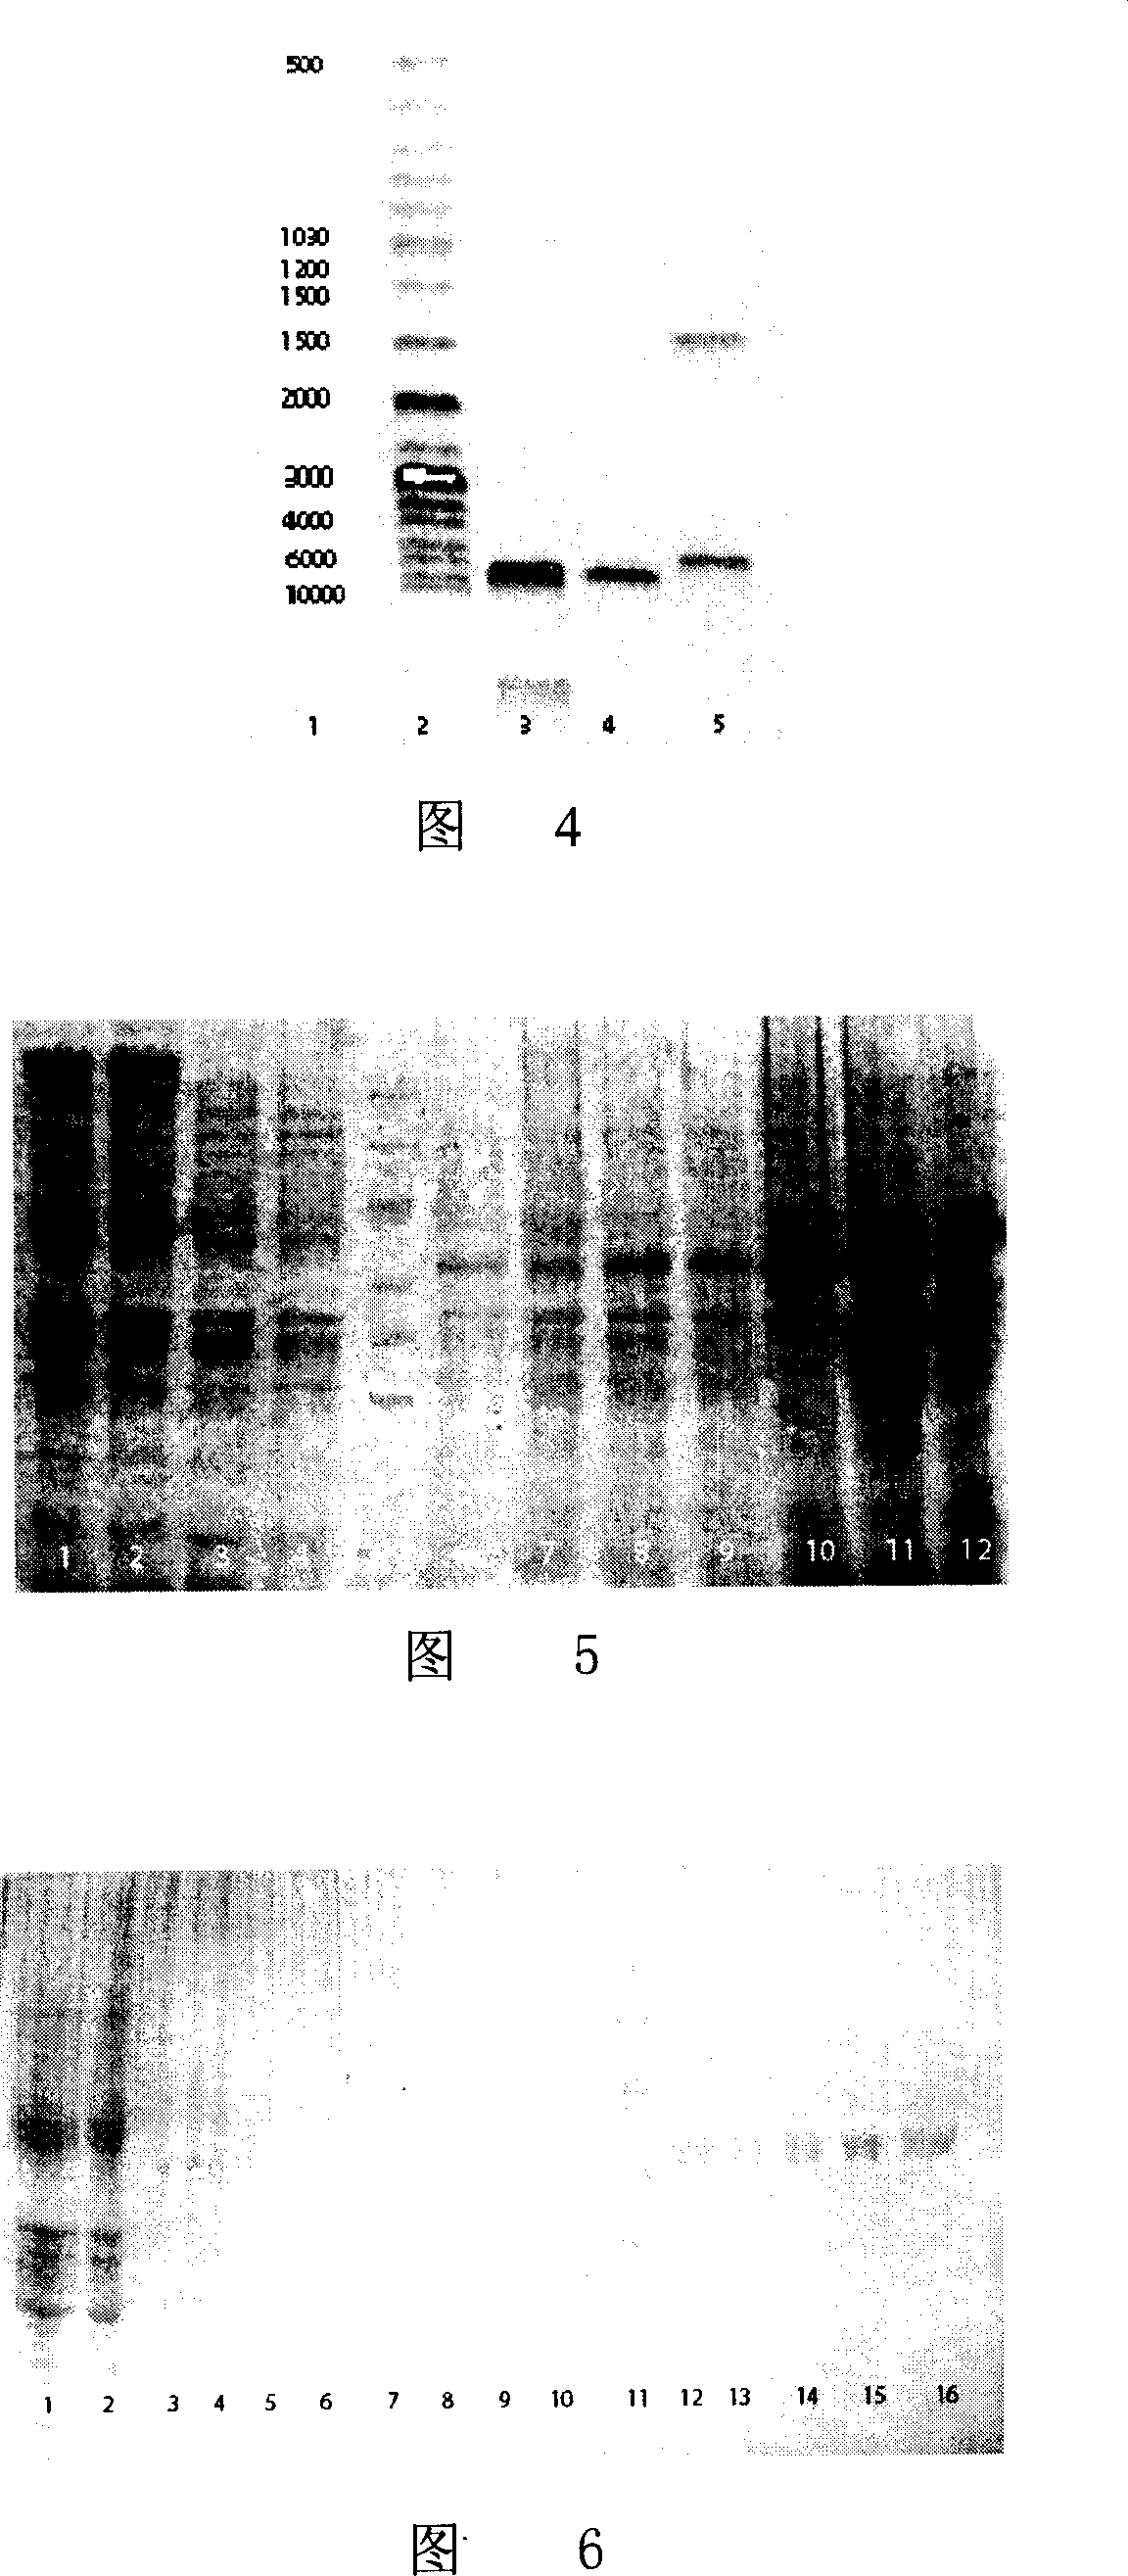 Gene expression product of extro-cellular domain amino end of human thyrotropin receptor, its preparing method and application in enzyme immune technology